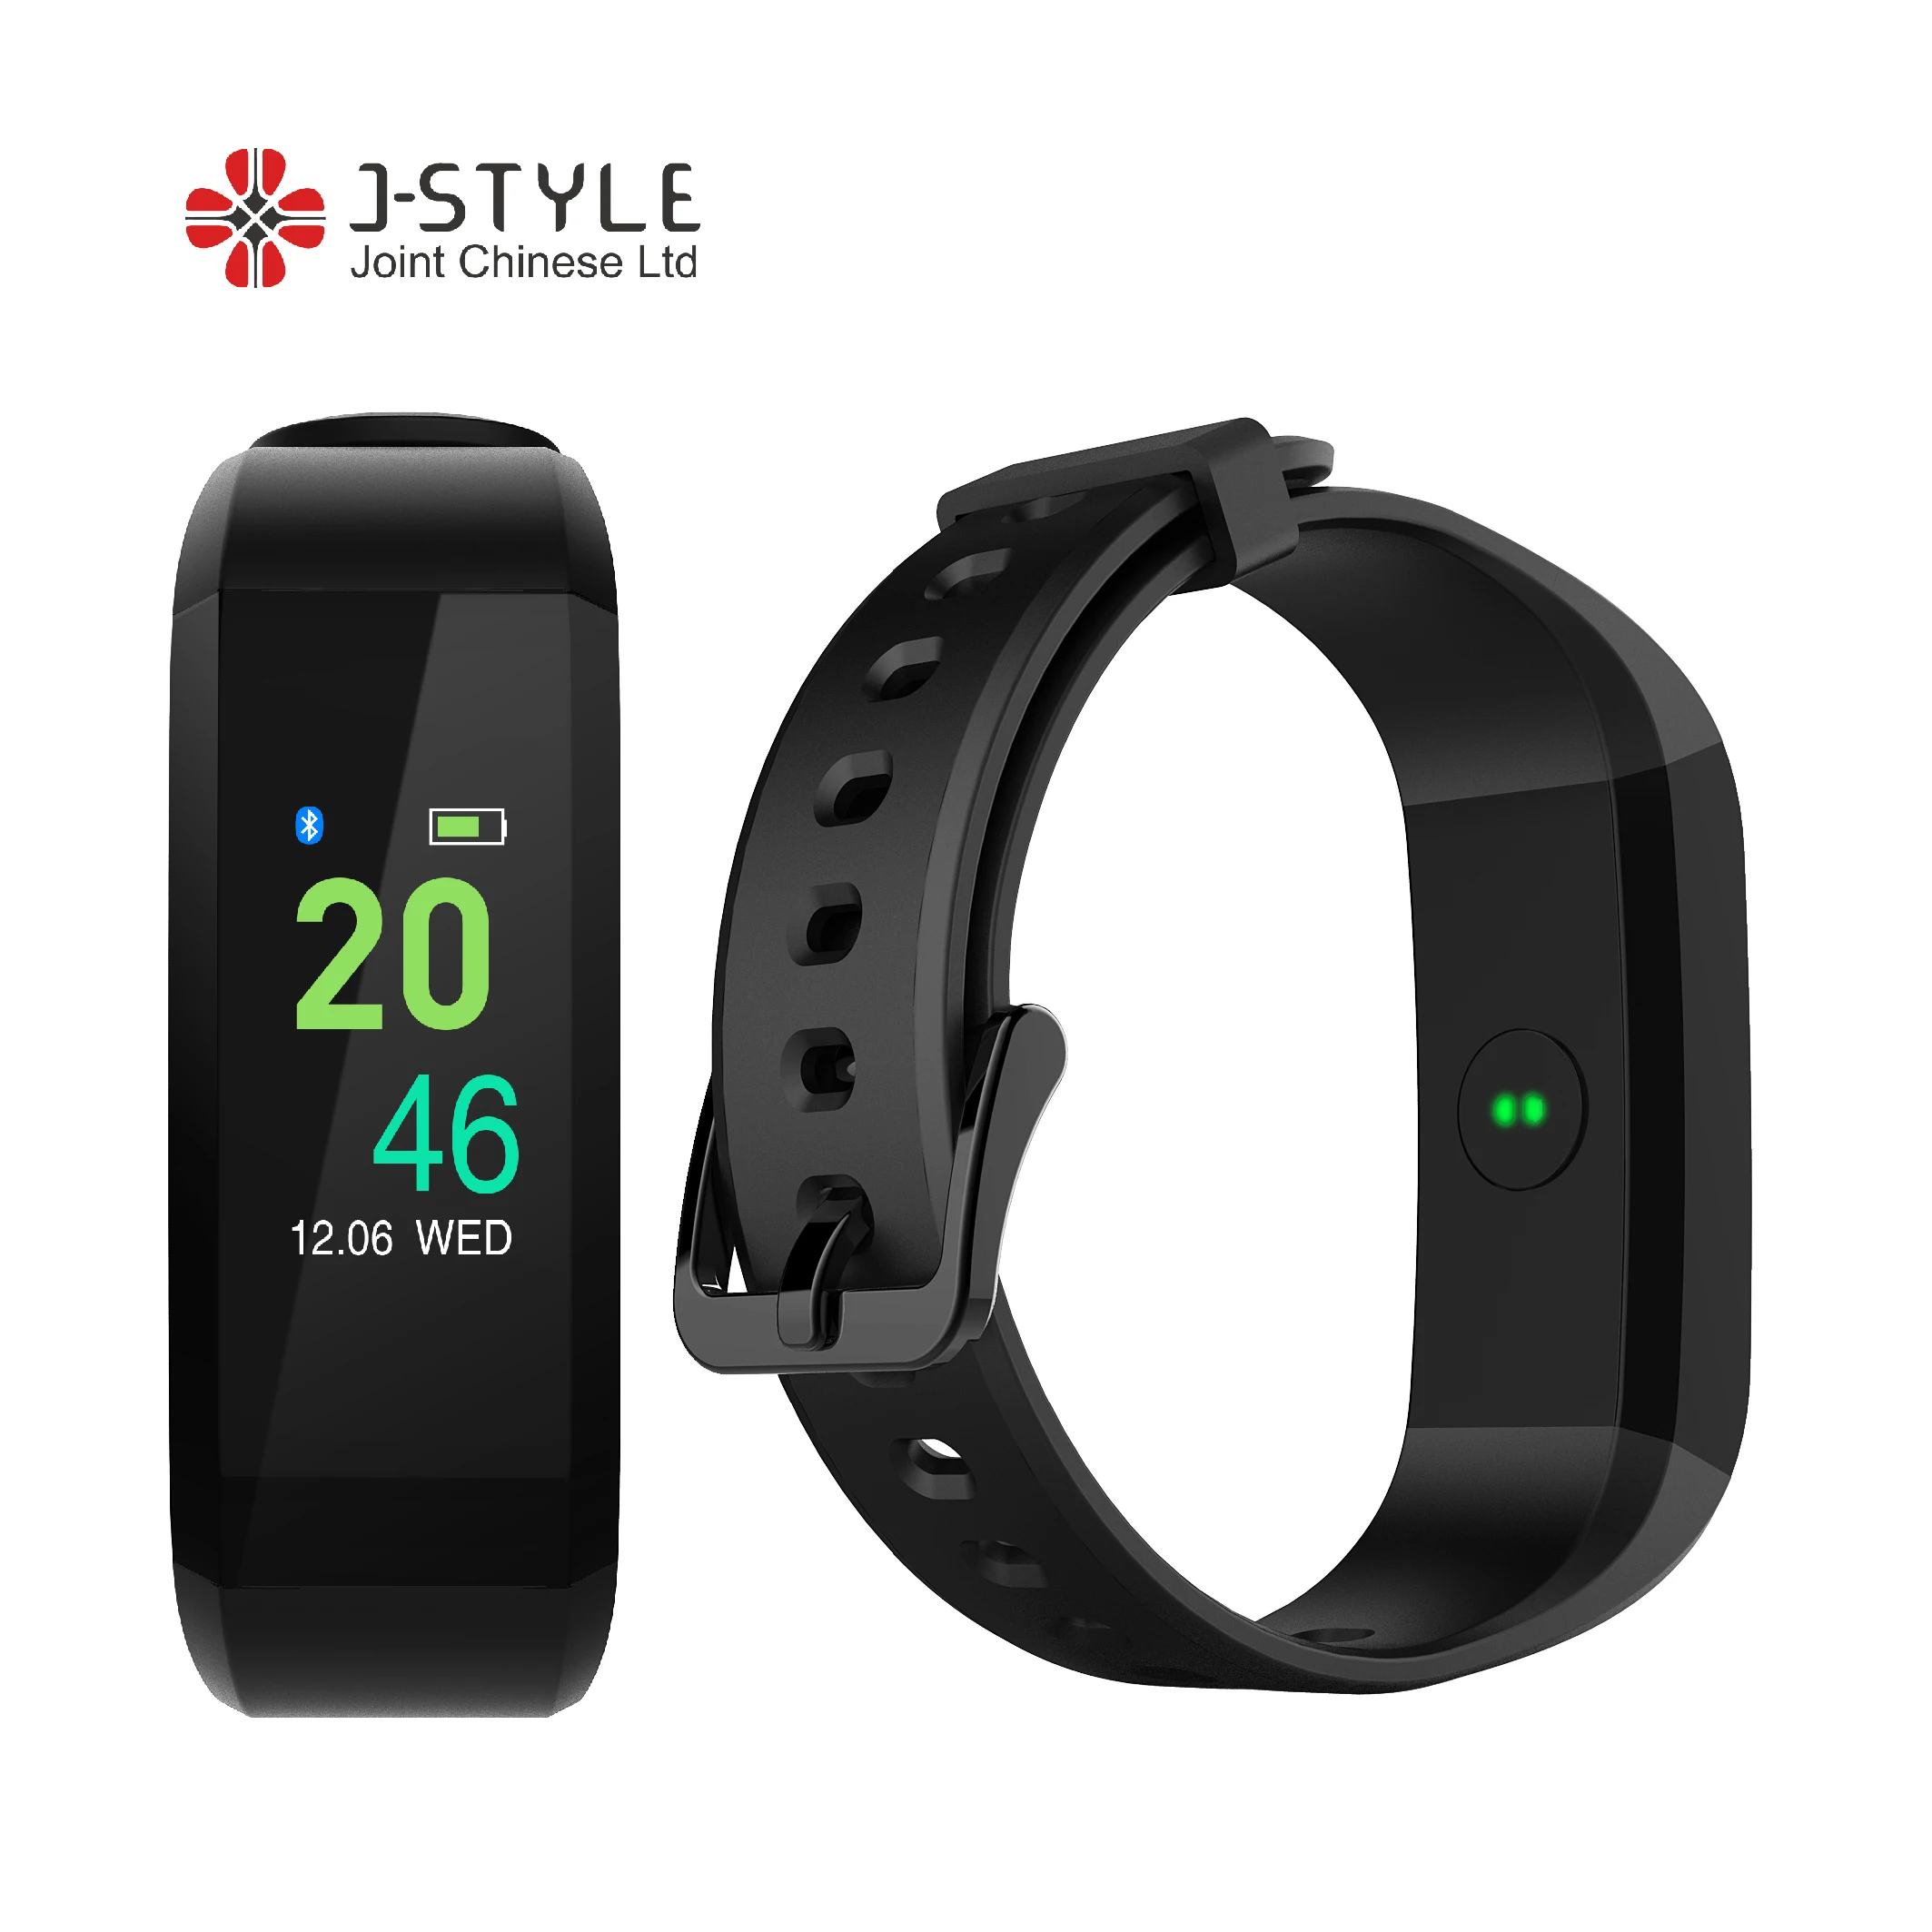 

J-Style 1810 Bluetooth Smart Watch Bracelet Heart Rate Fitness Tracker Sleep Monitor with 0.96 TFT Color Display, Black, red, slate, or oem color